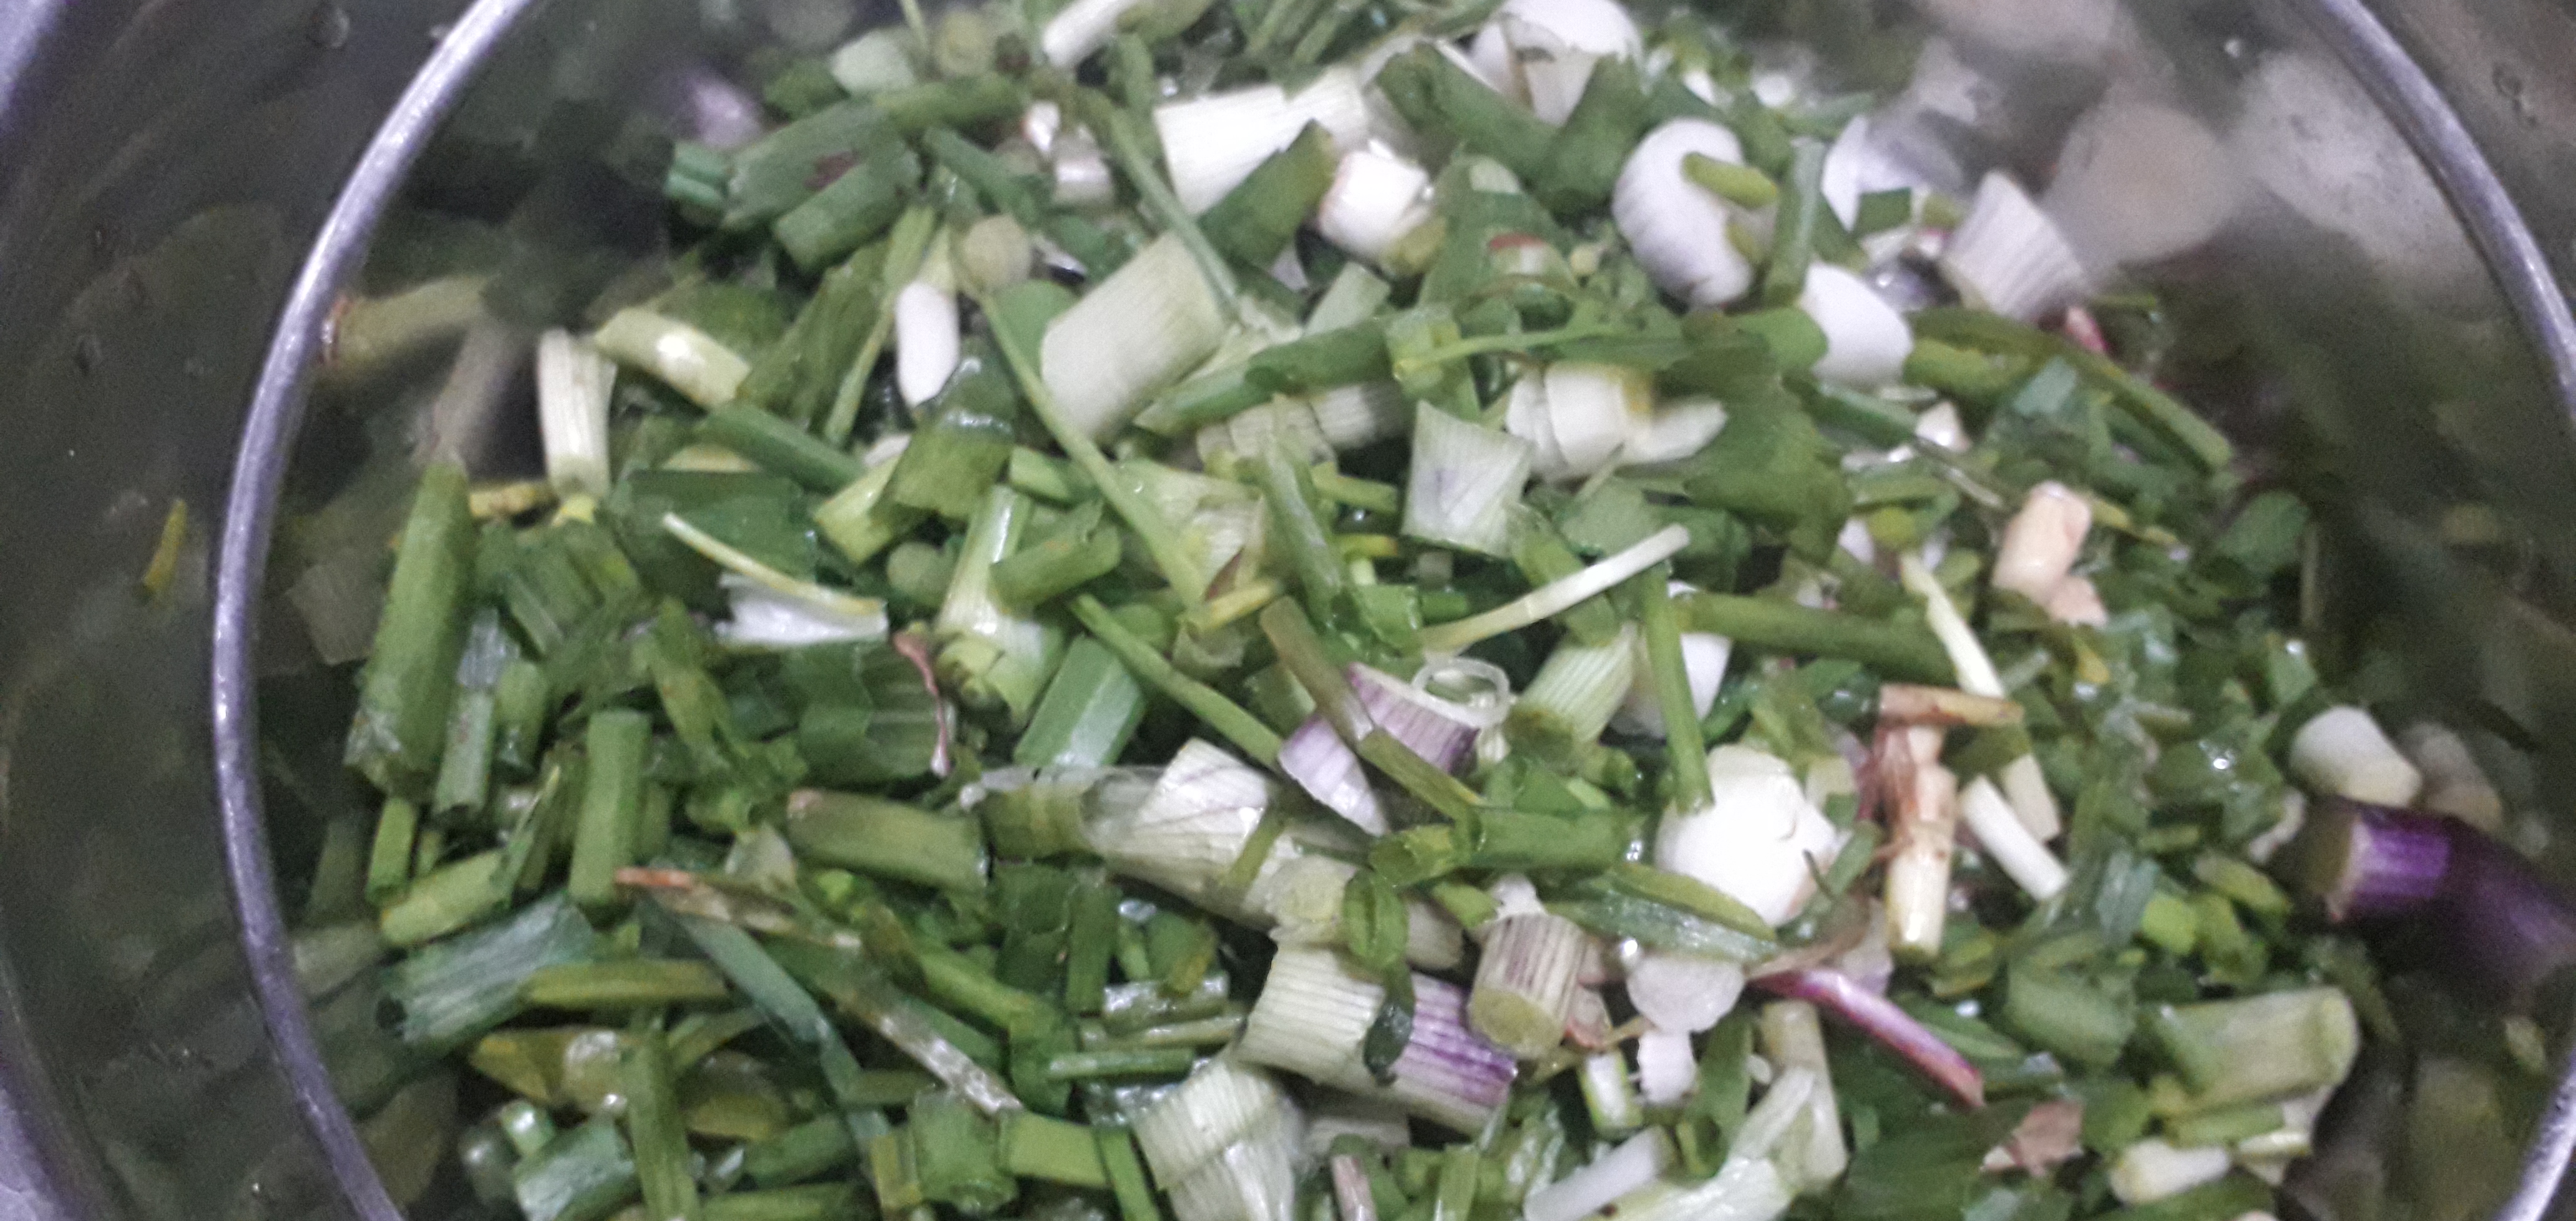 Slices of Spring Onions or Scallions